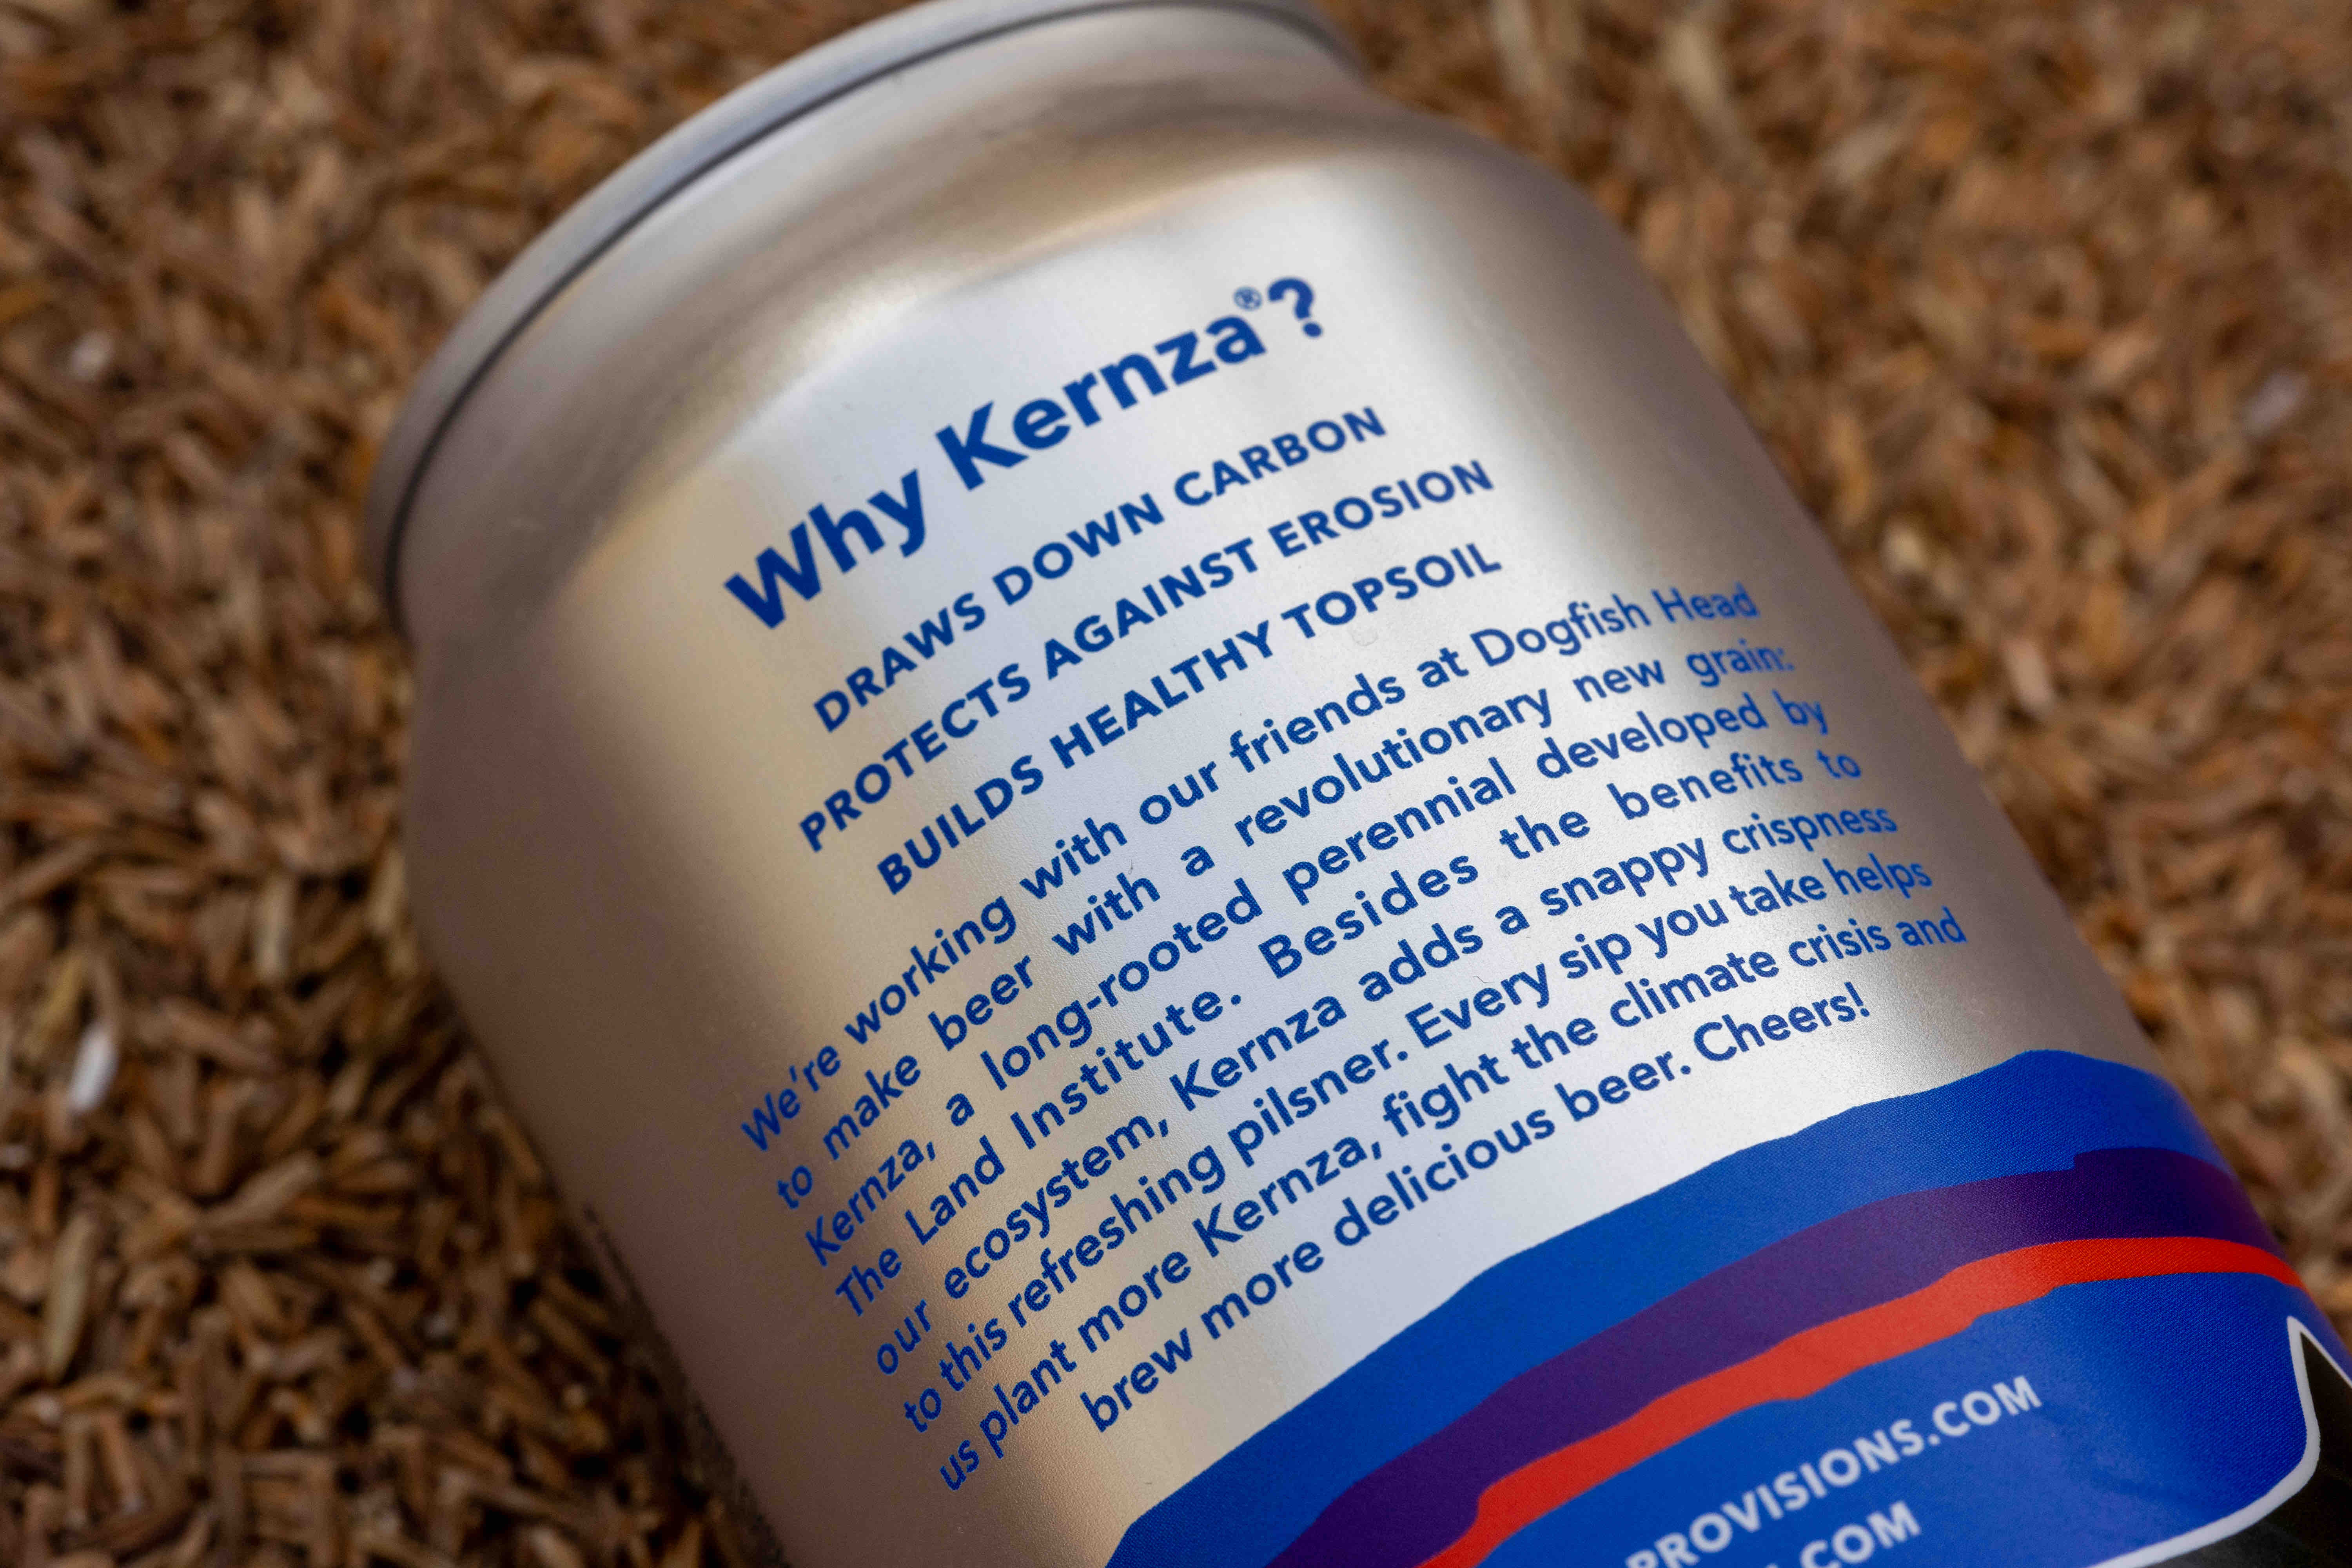 Why Kernza? (image courtesy of Dogfish Head Craft Brewery)